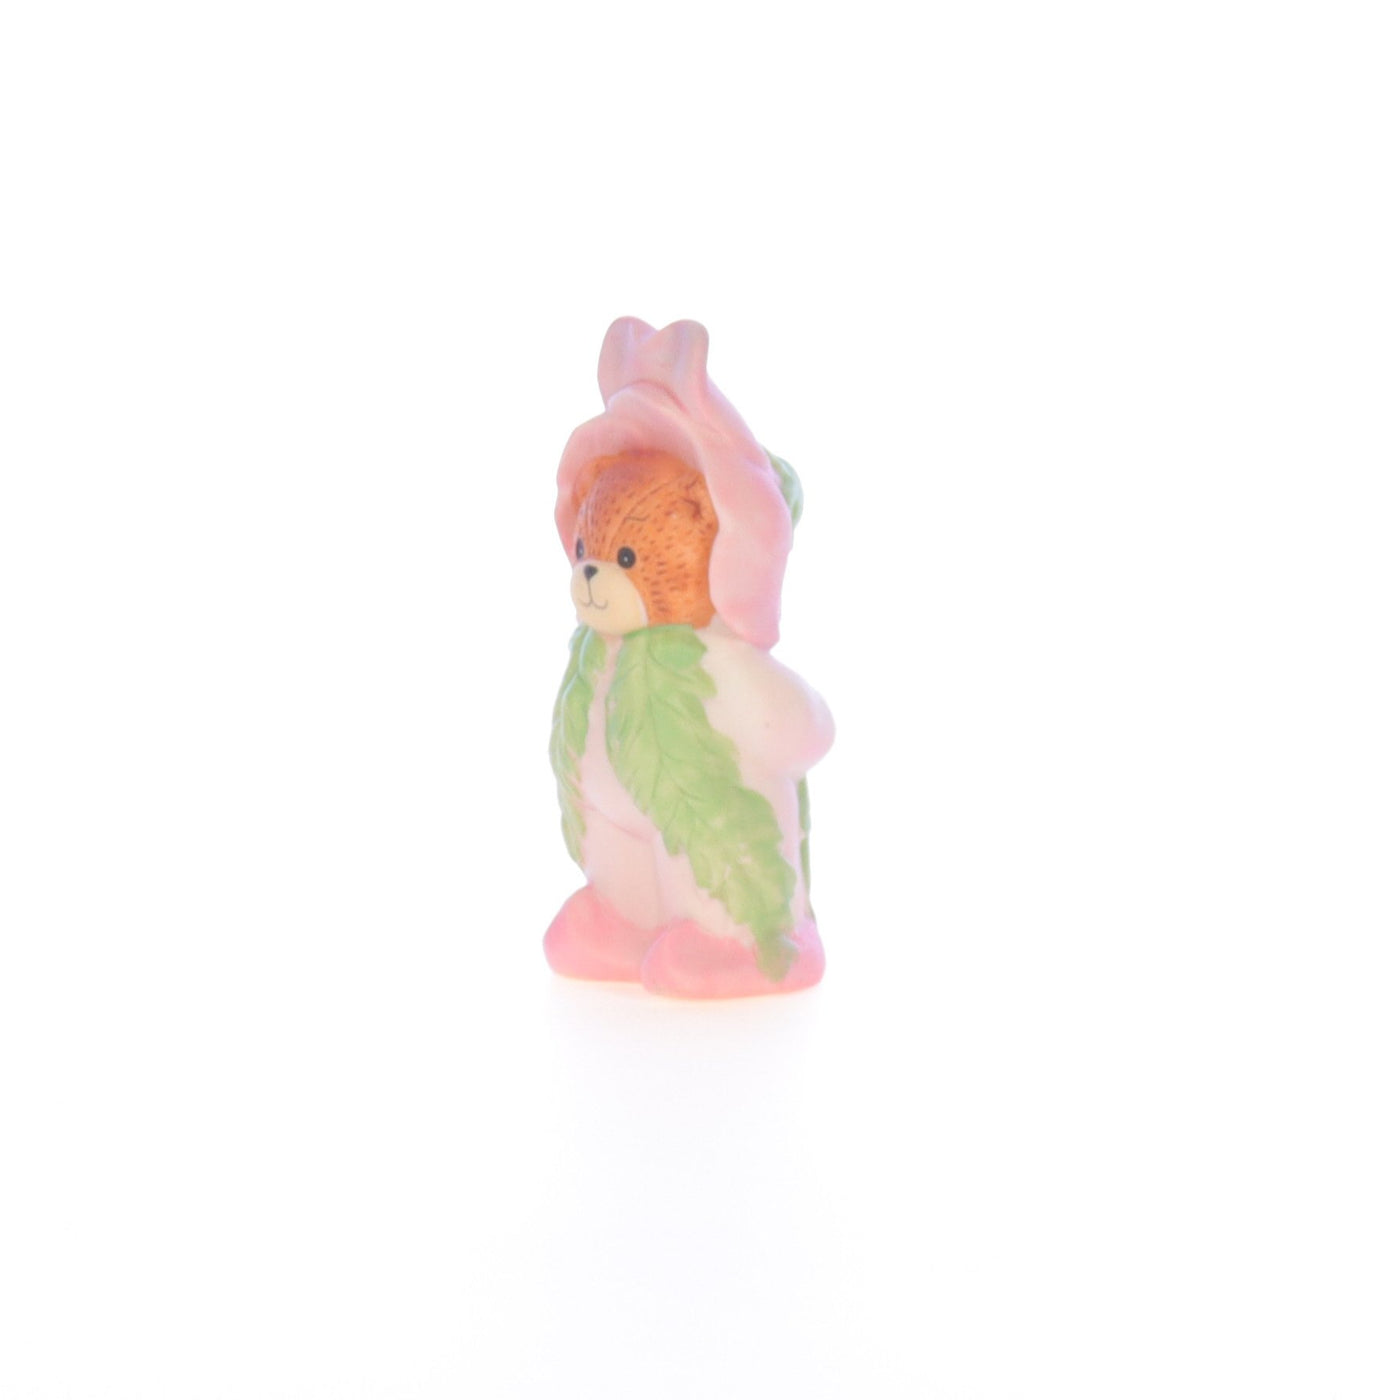 Lucy_And_Me_by_Lucy_Atwell_Porcelain_Figurine_Bear_with_Pink_Flower_Costume_Lucy_Unknown_011_02